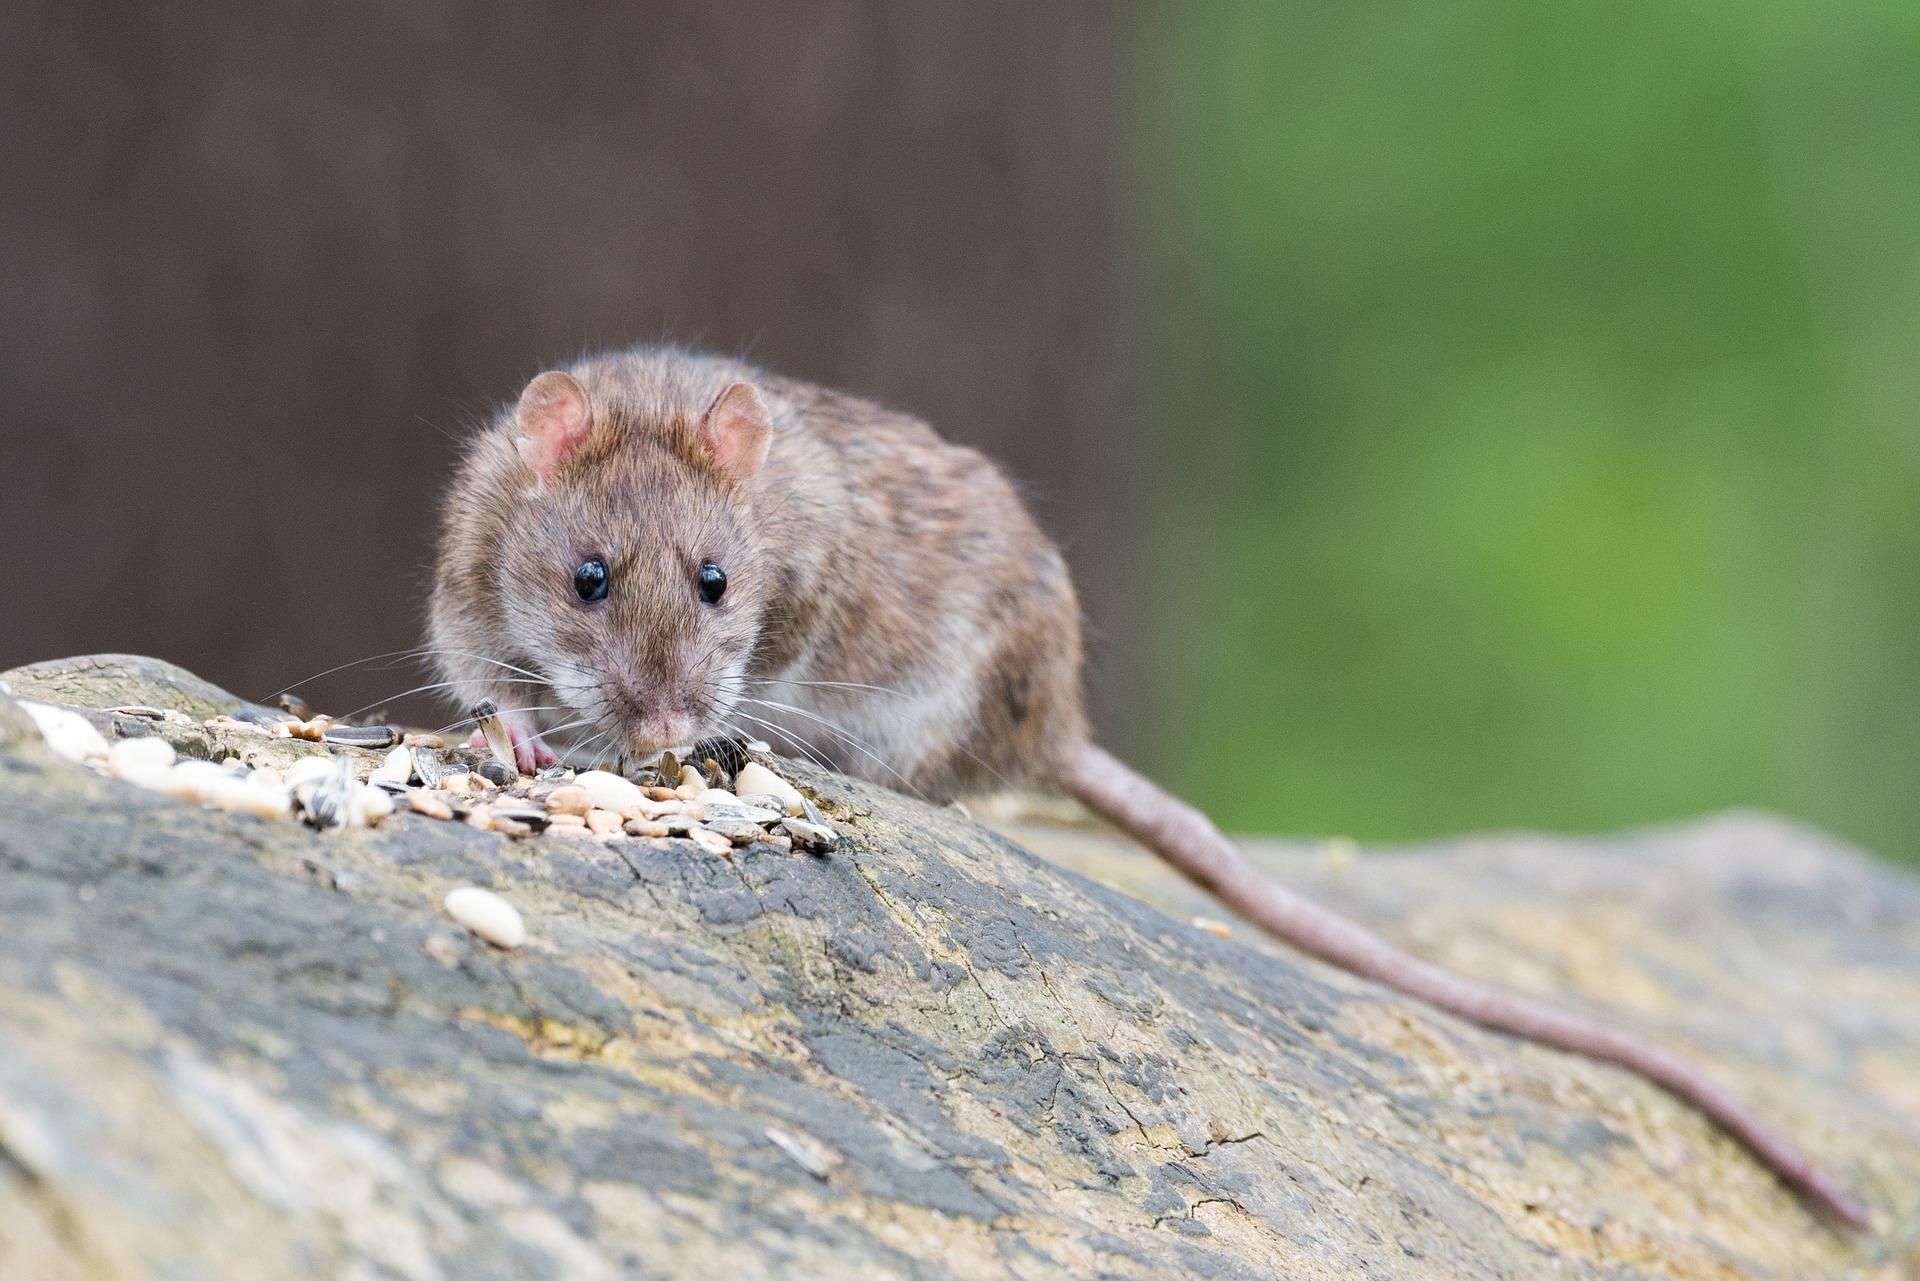 Common brown rats in UK